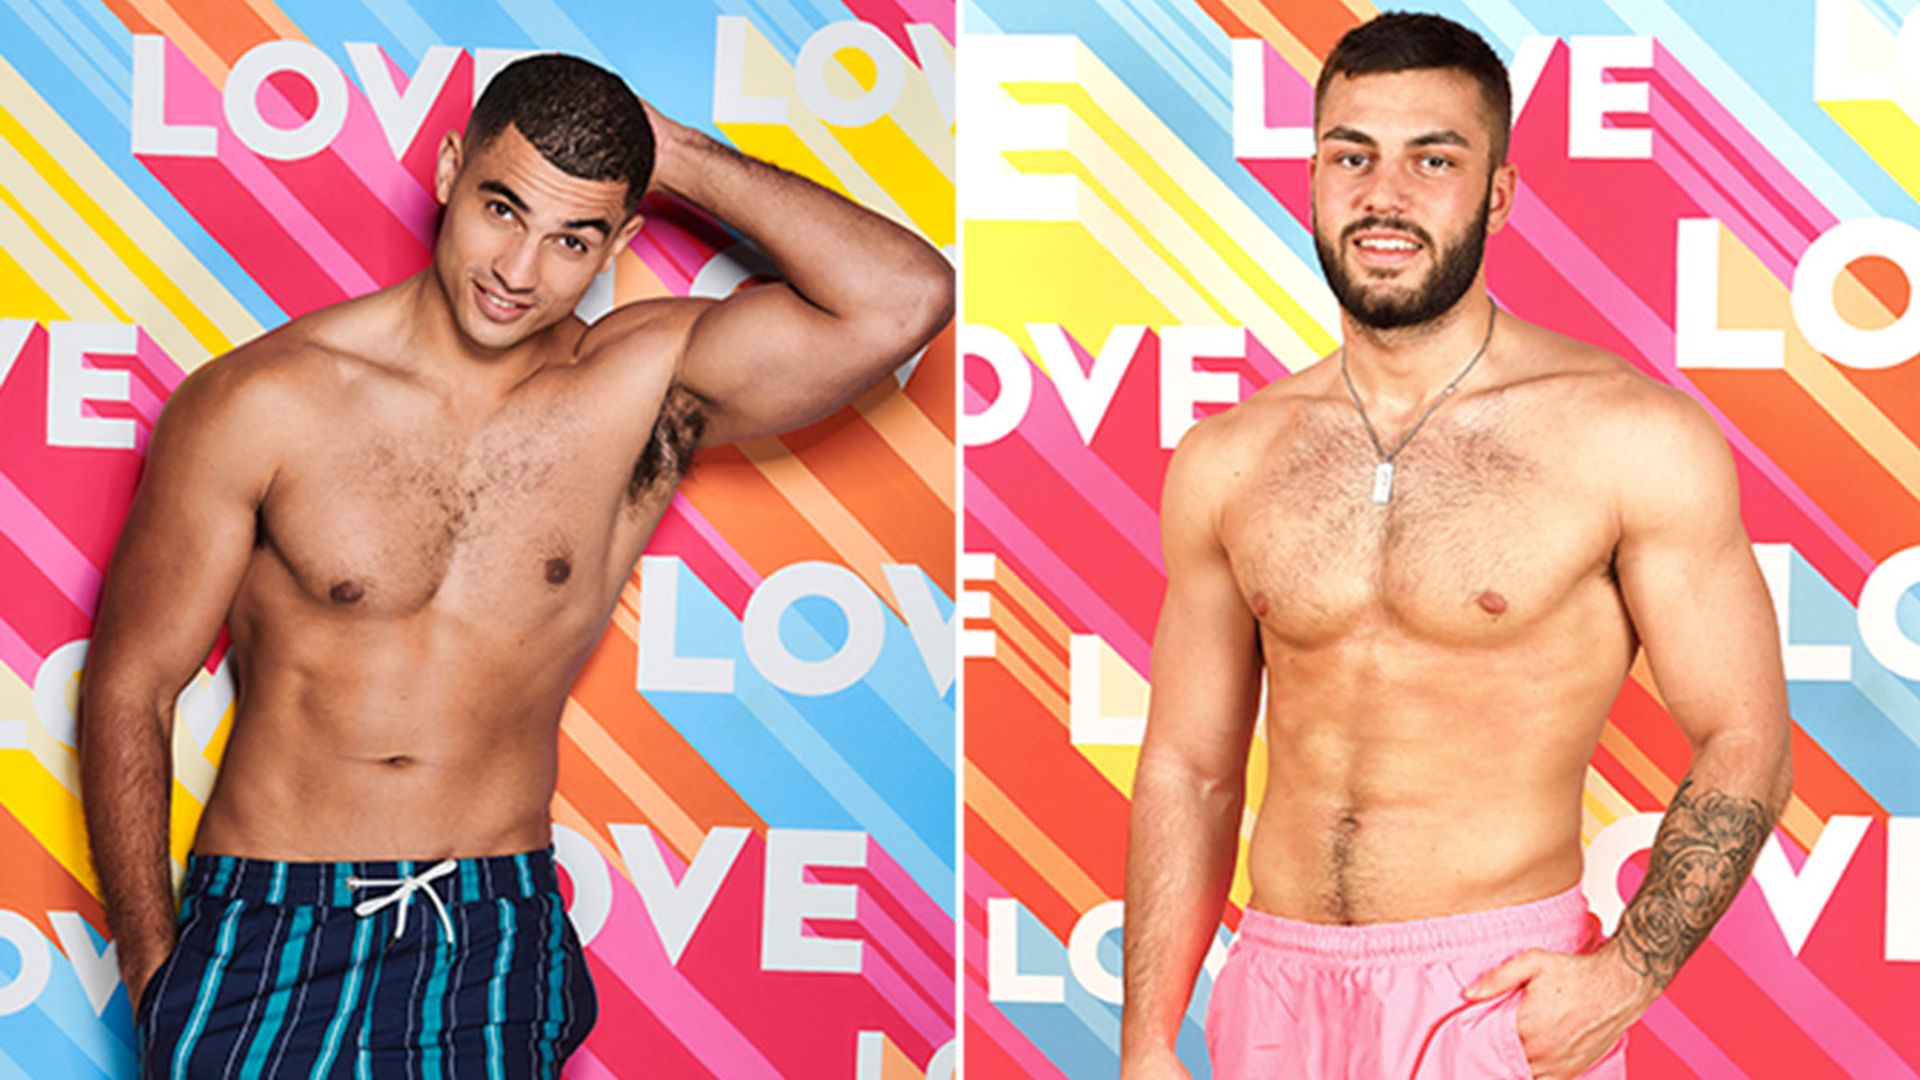 Meet the two new contestants Connagh and Finley heading into the Love Island villa tonight